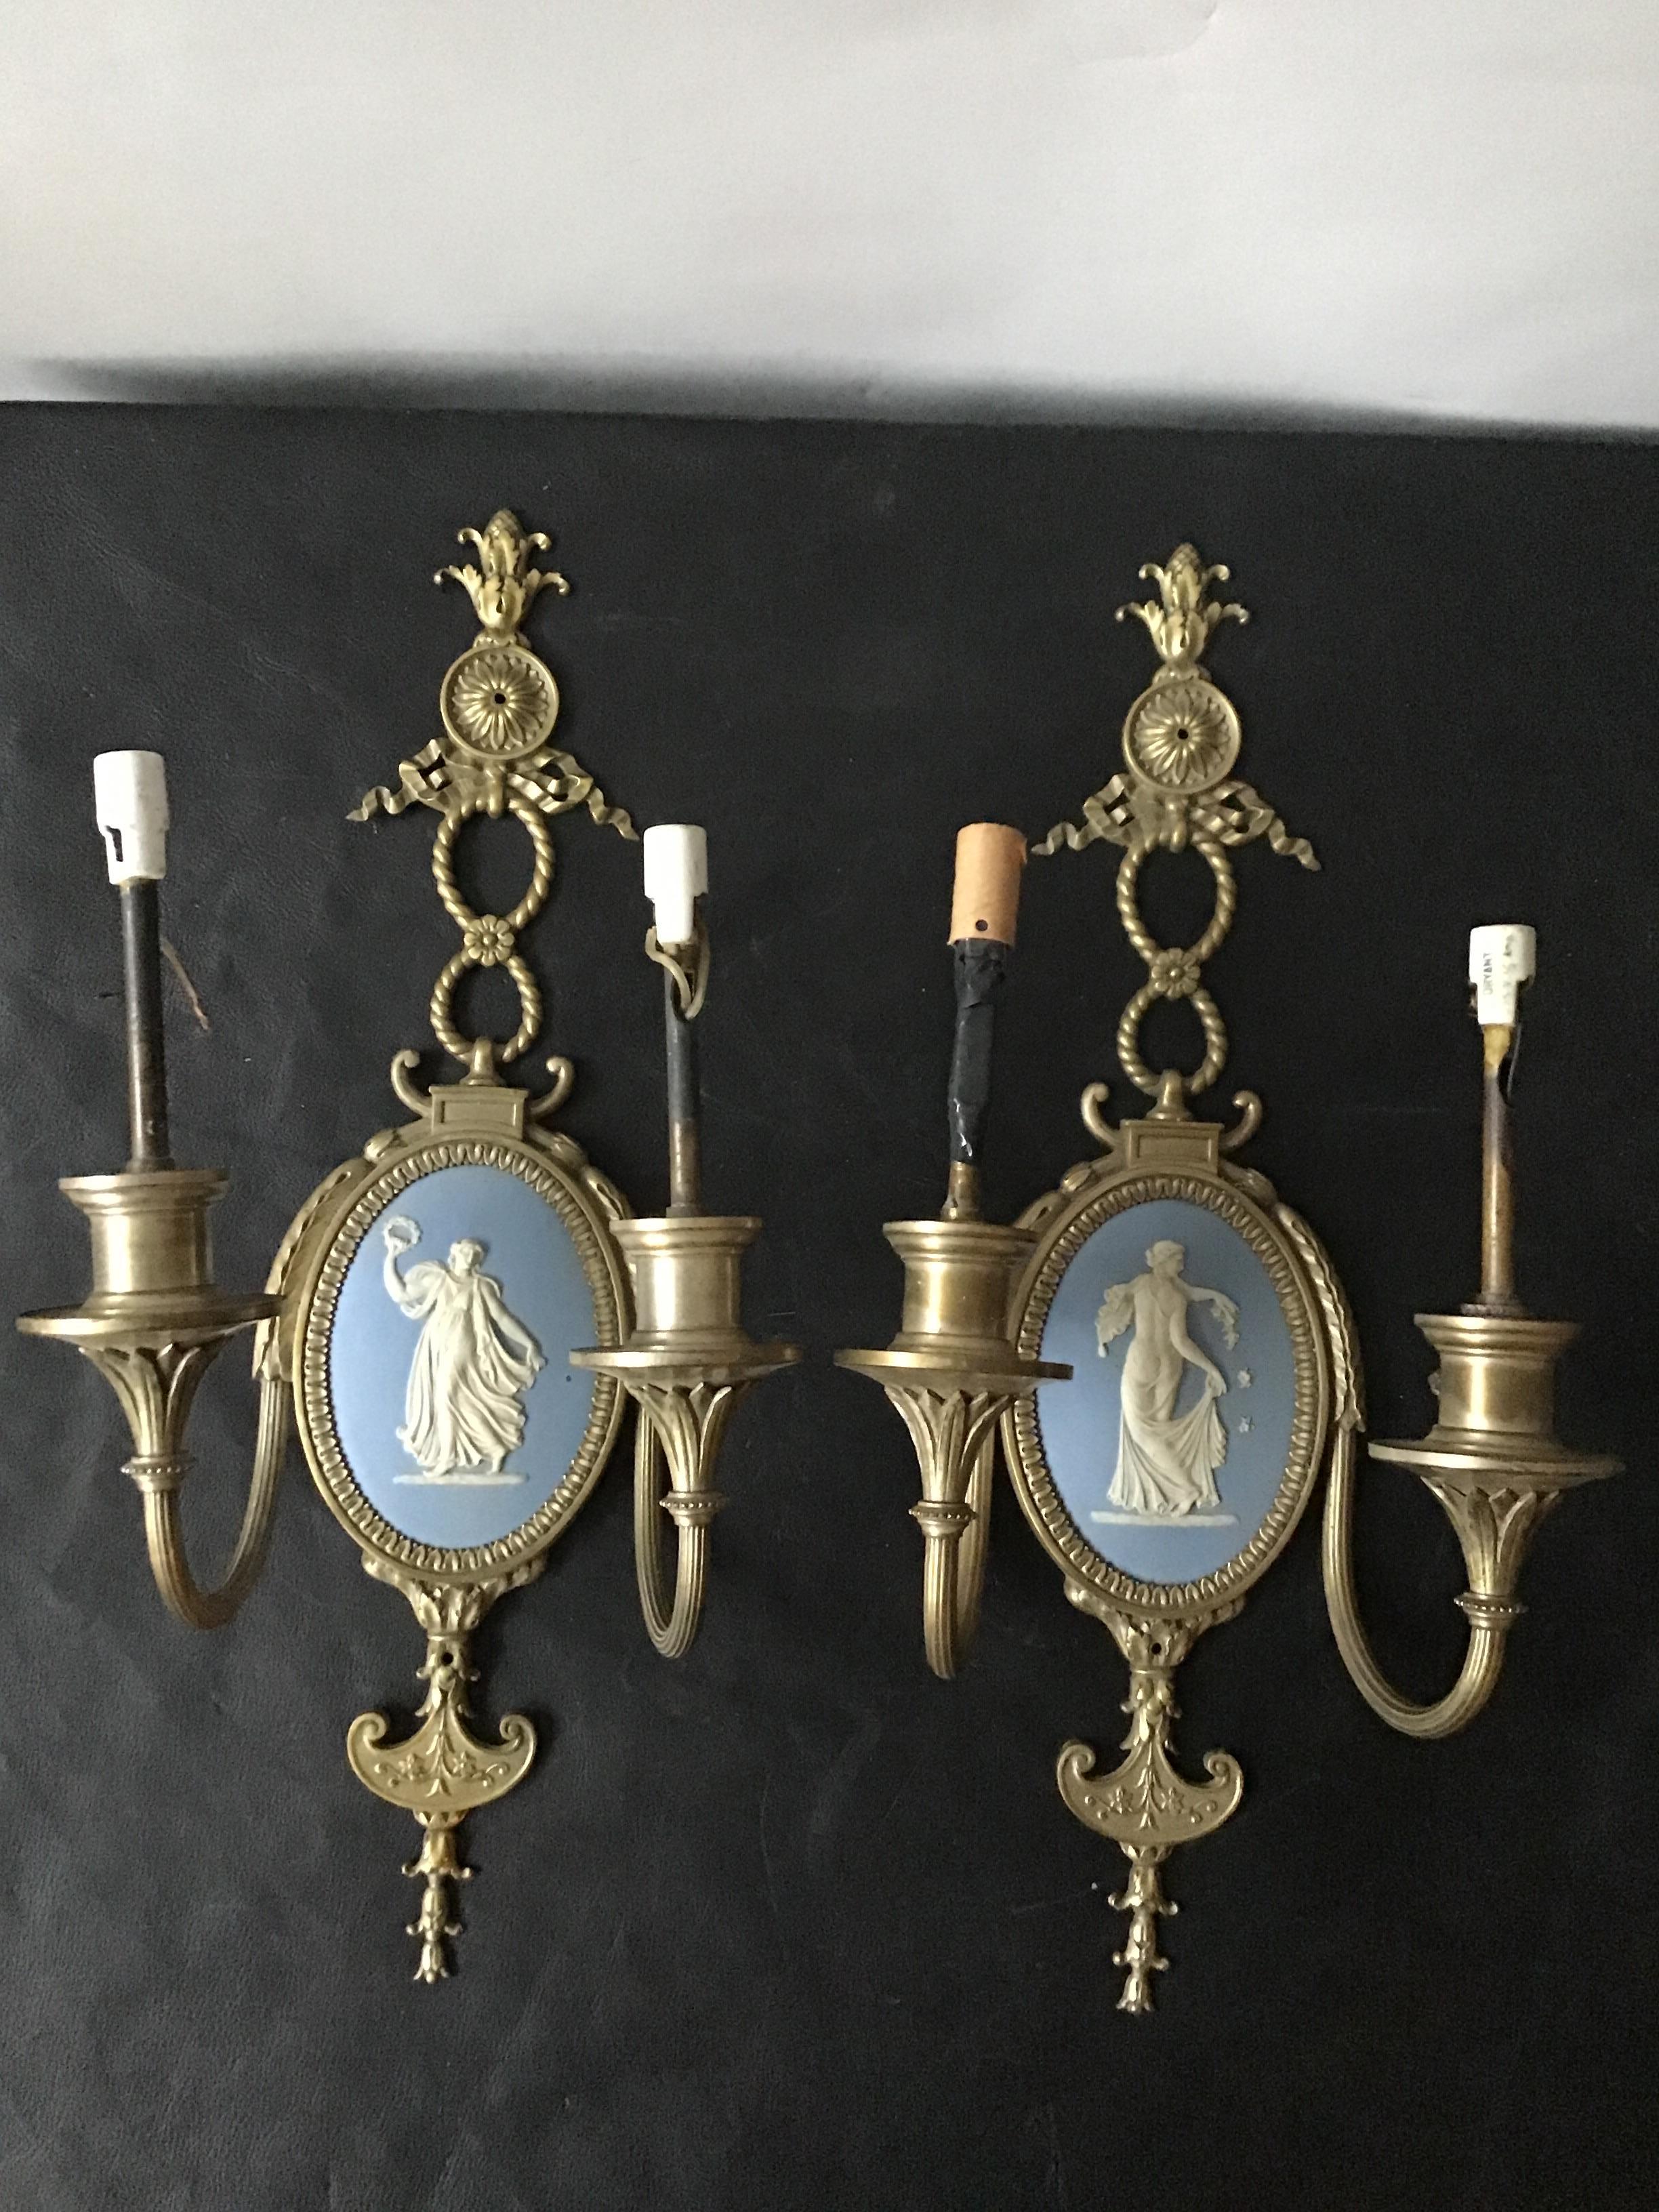 1940s Wedgwood Sconces In Good Condition For Sale In Tarrytown, NY